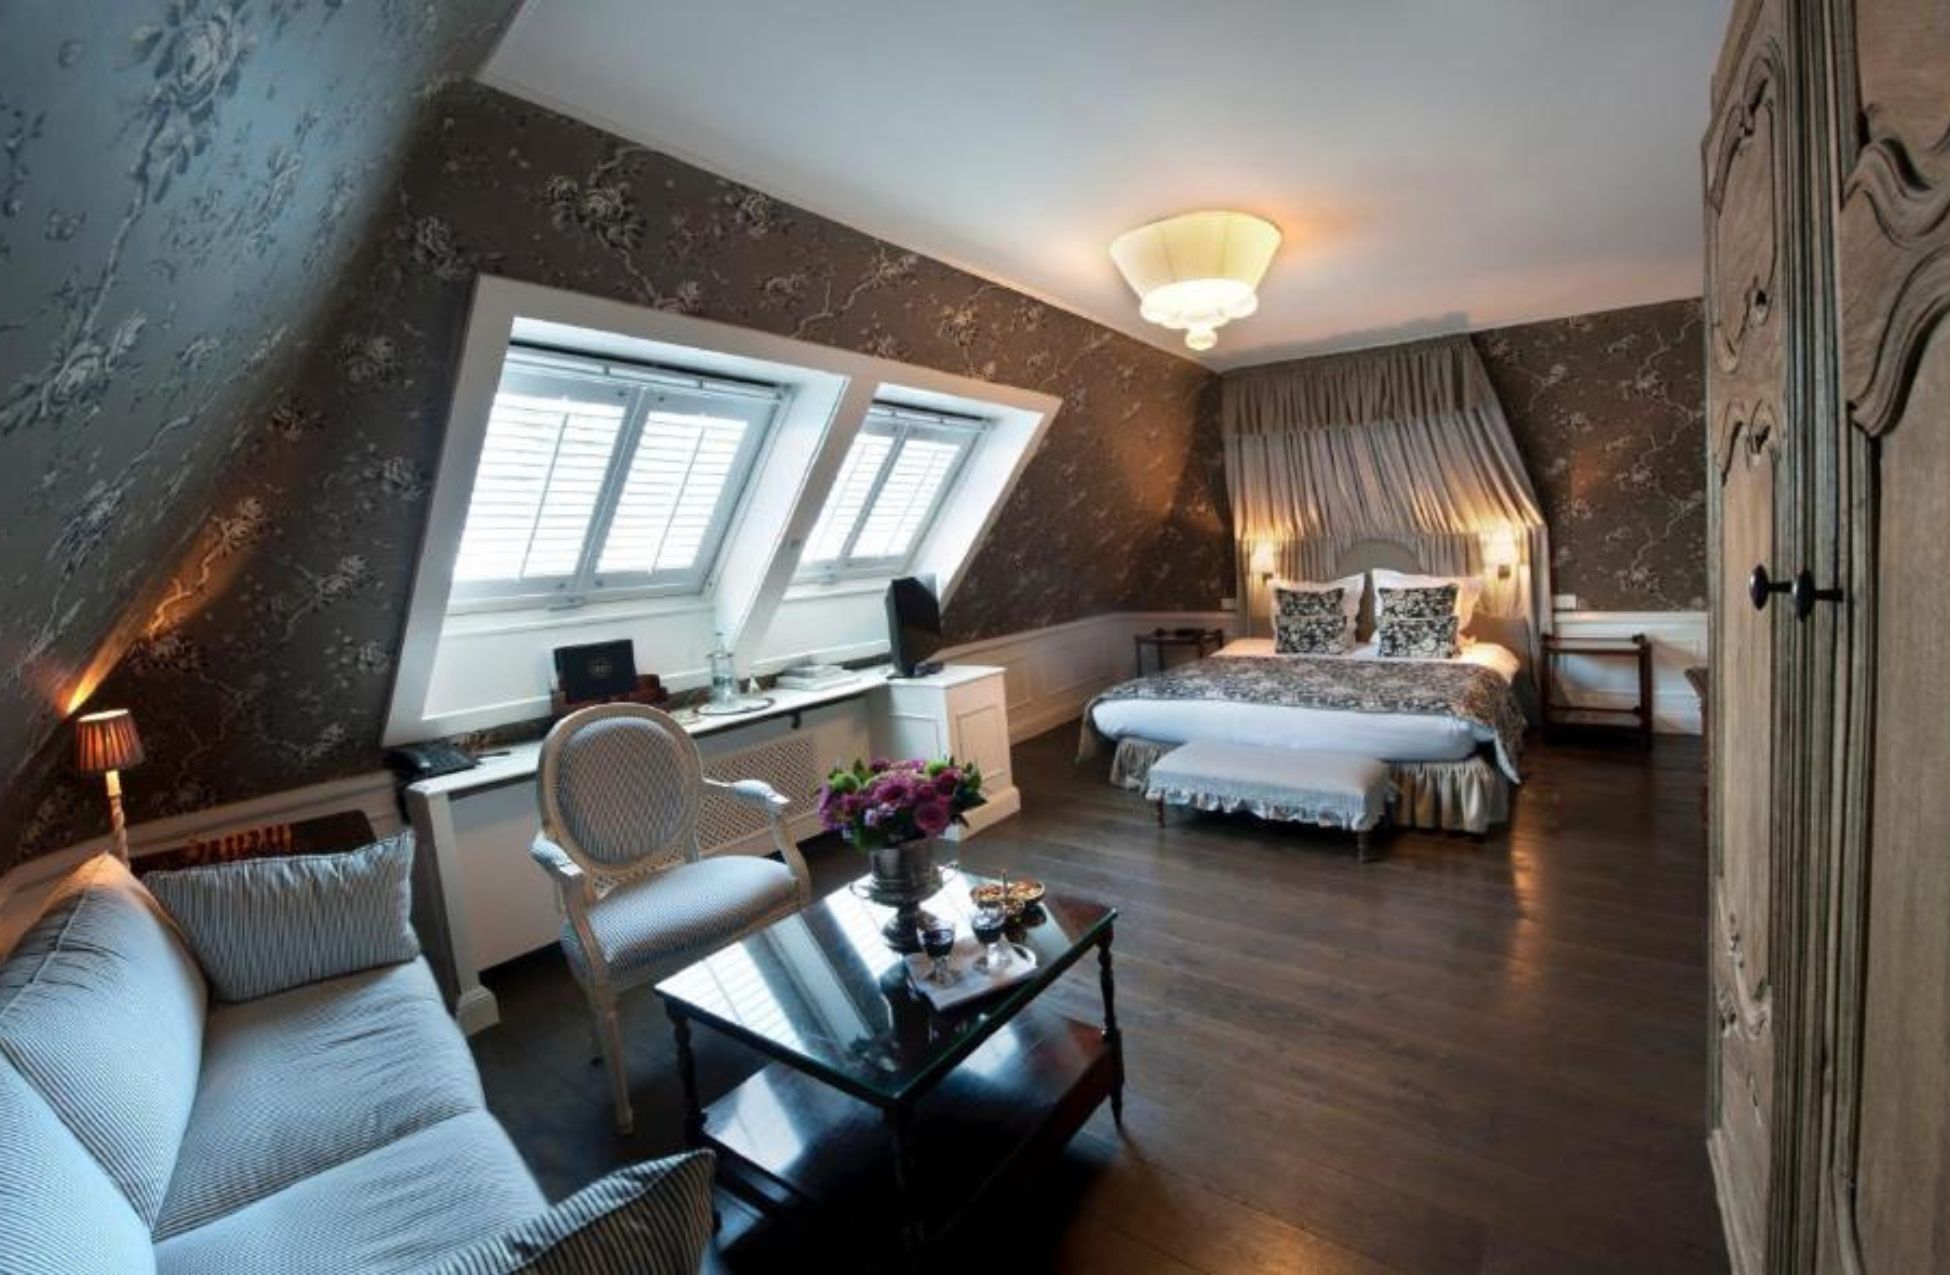 The Pand Hotel - Best Hotels In Bruges